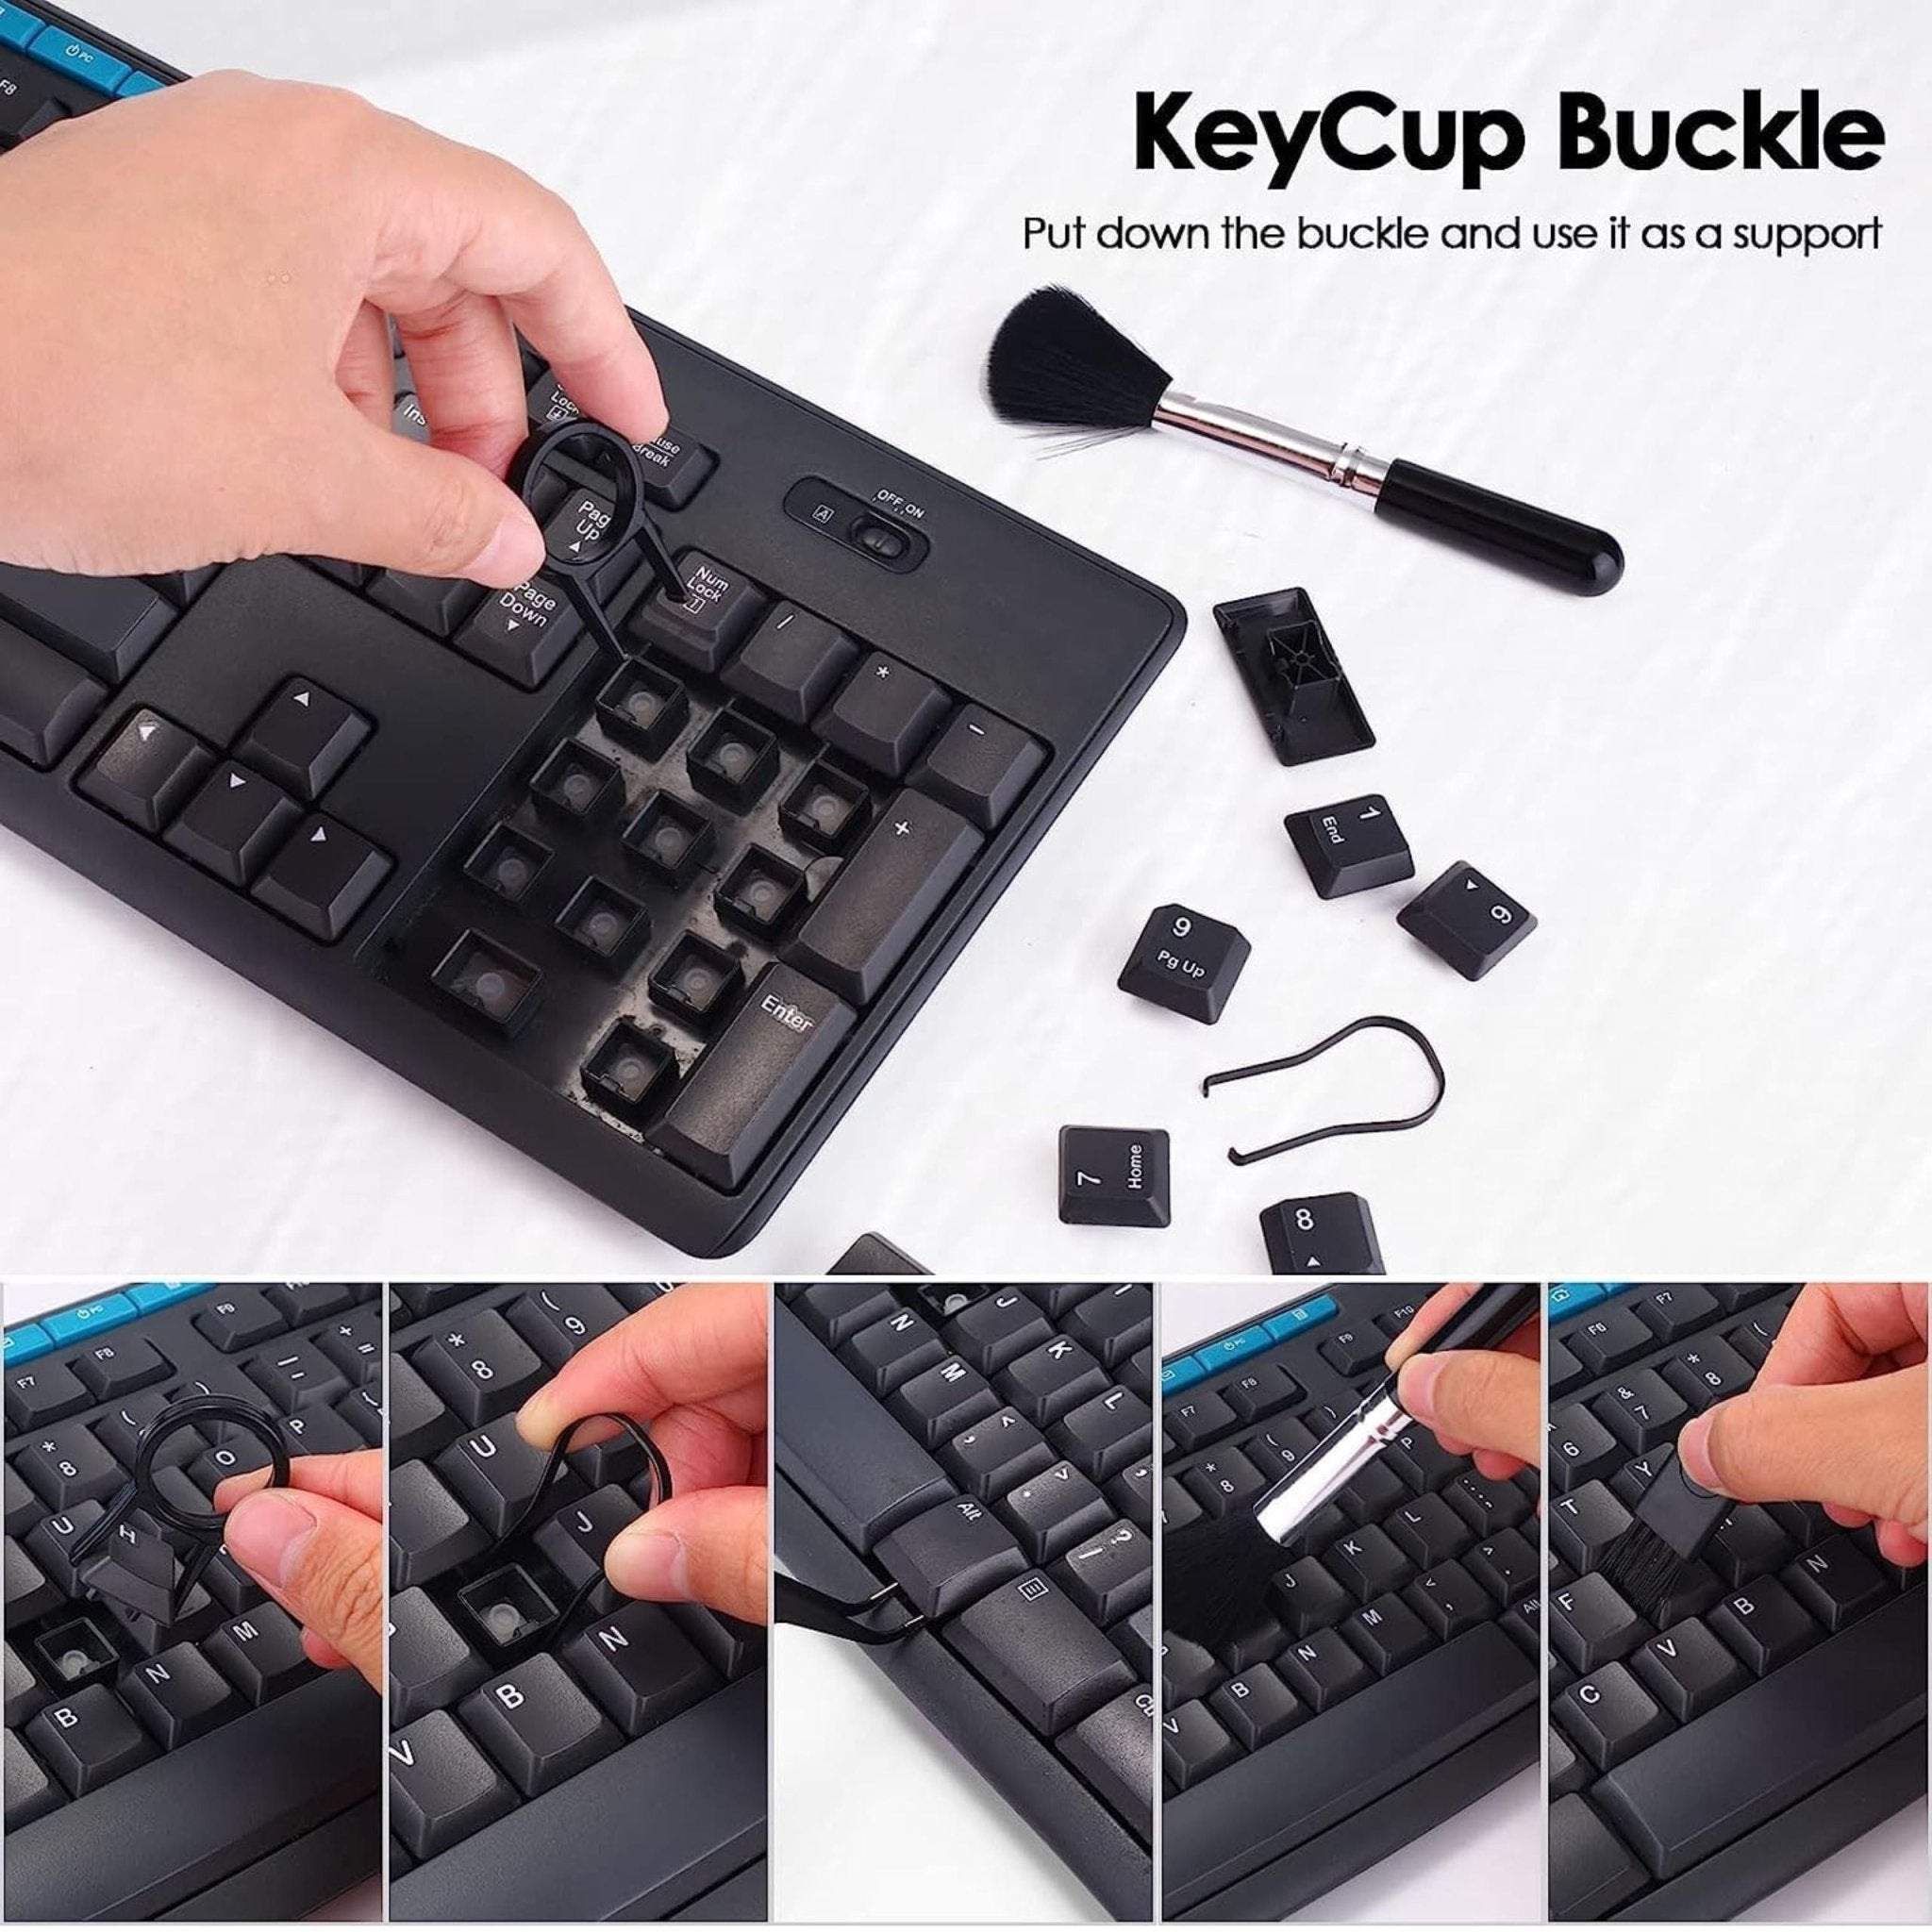 Multifunctional Cleaning Brush 18-in-1 Keyboard Cleaning Kit